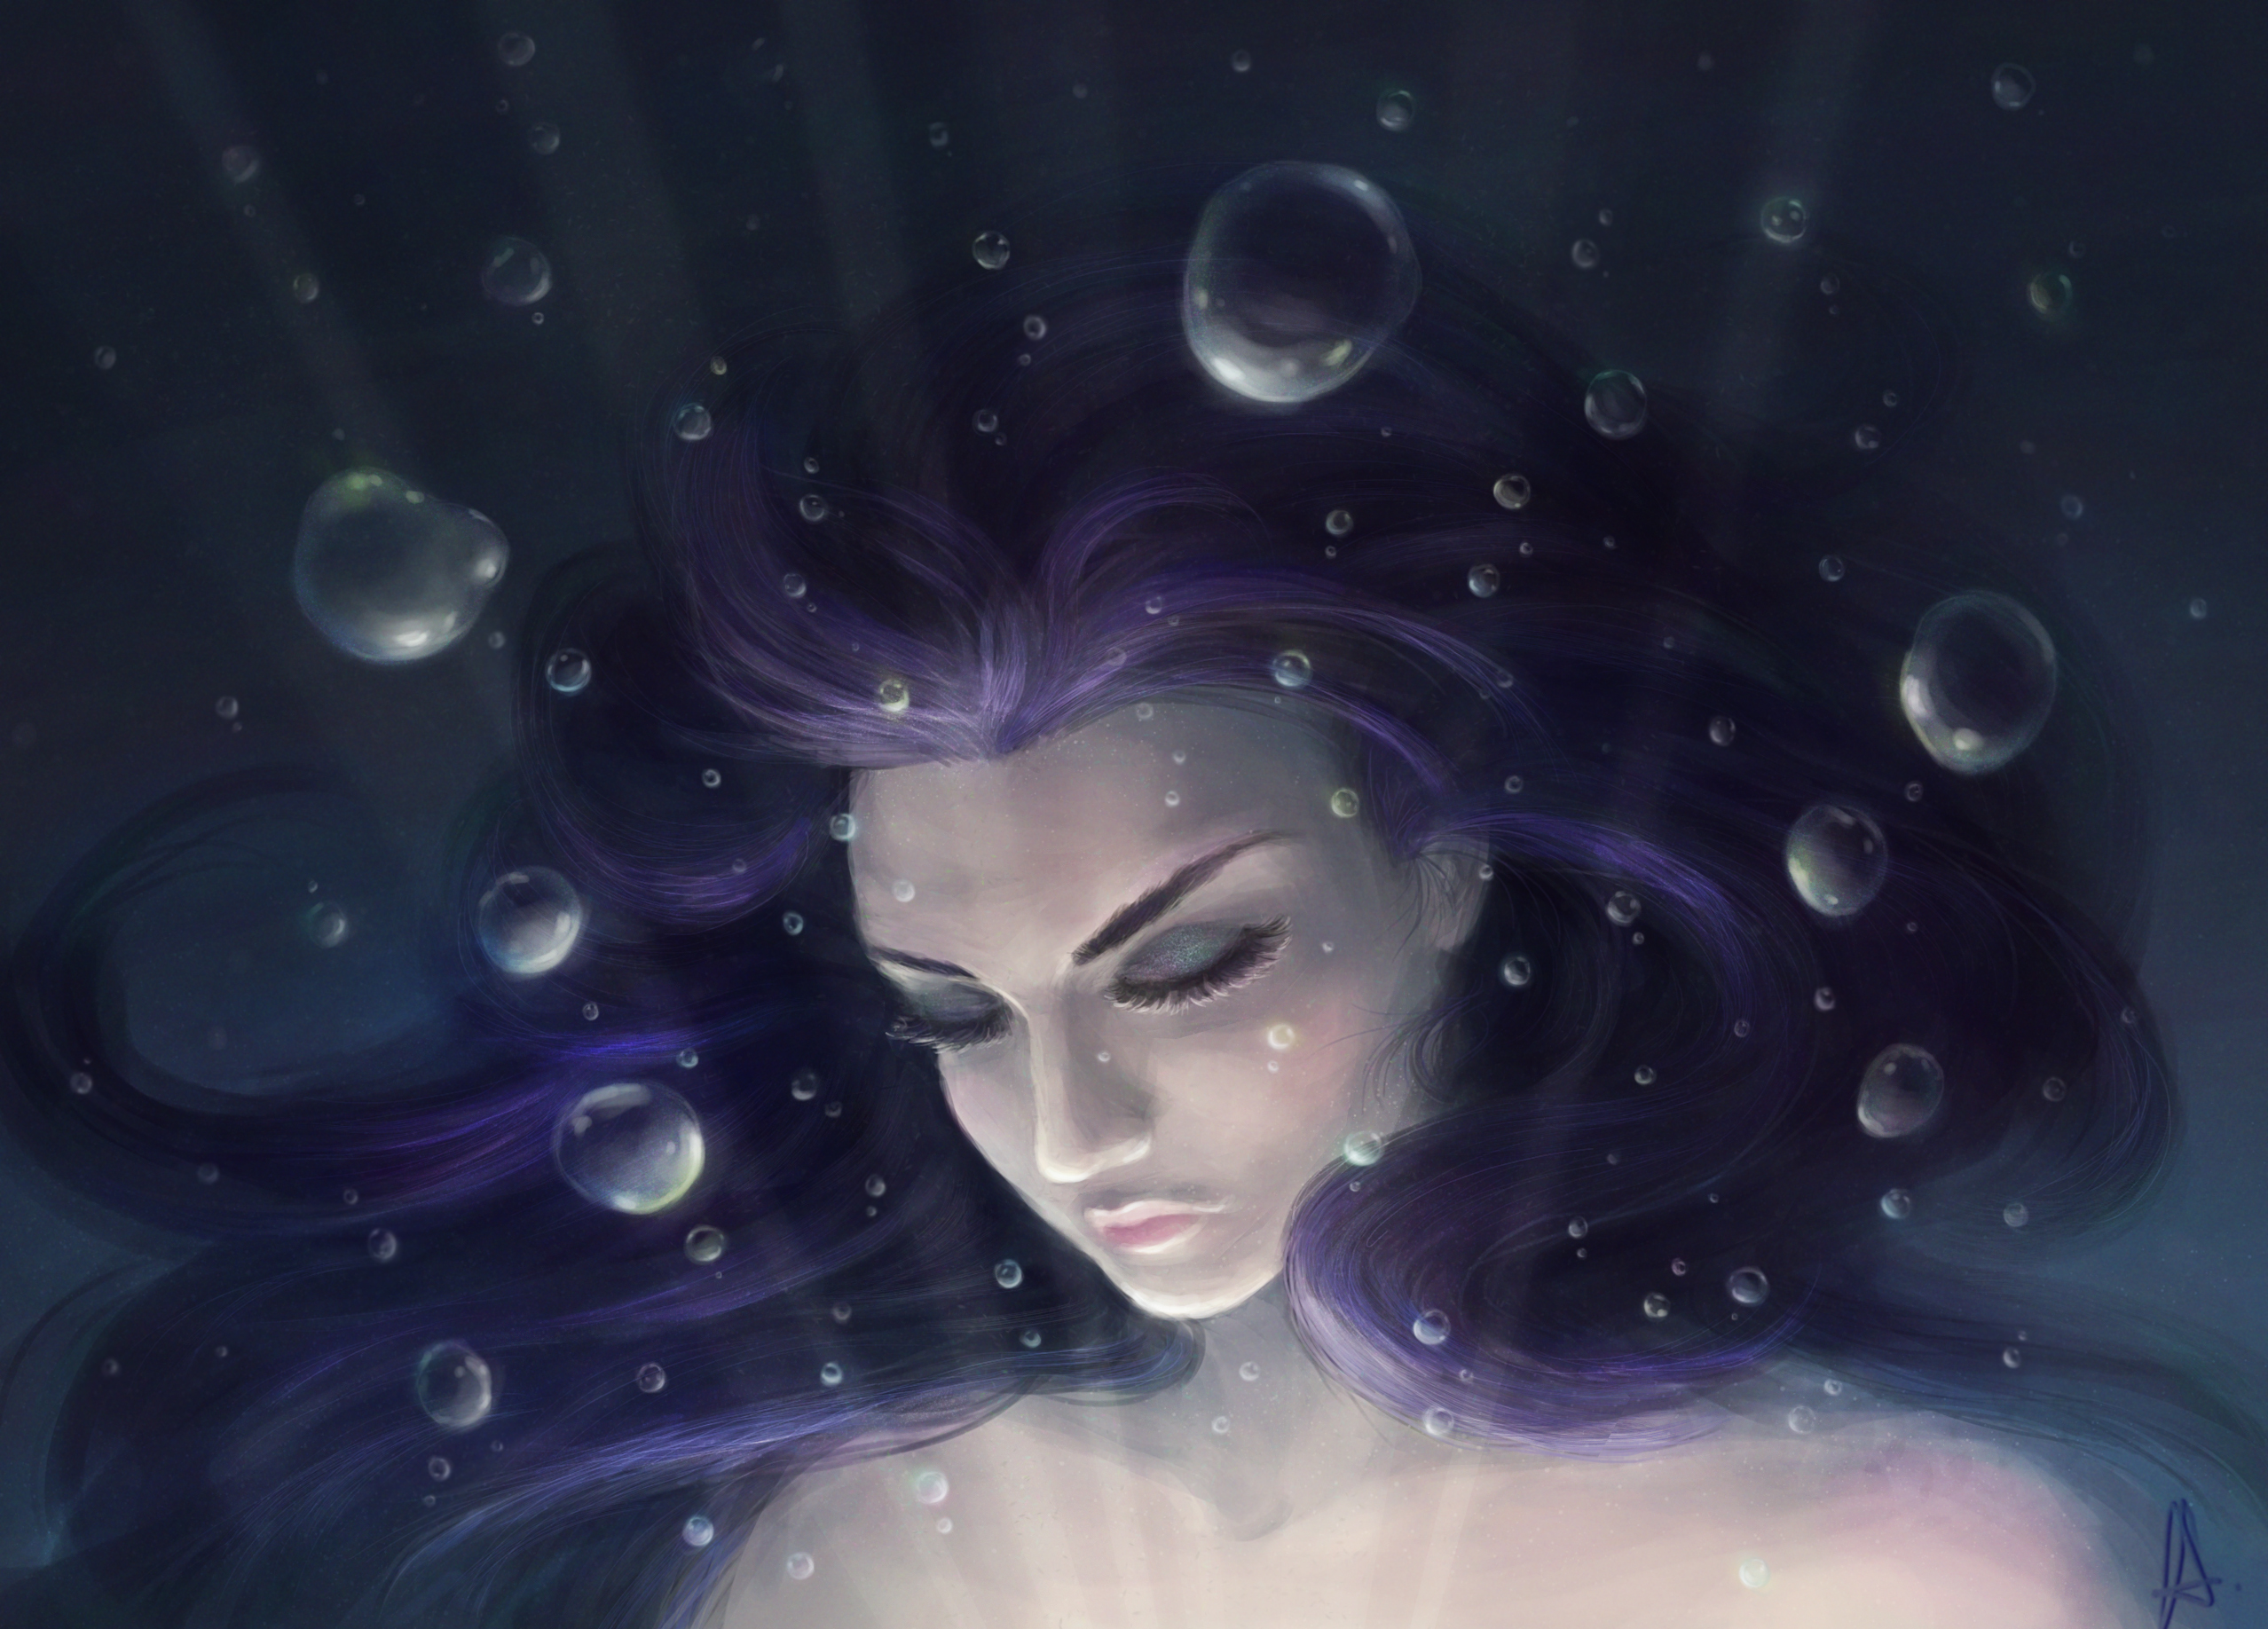 android under water, bubbles, art, girl, hair, face, underwater